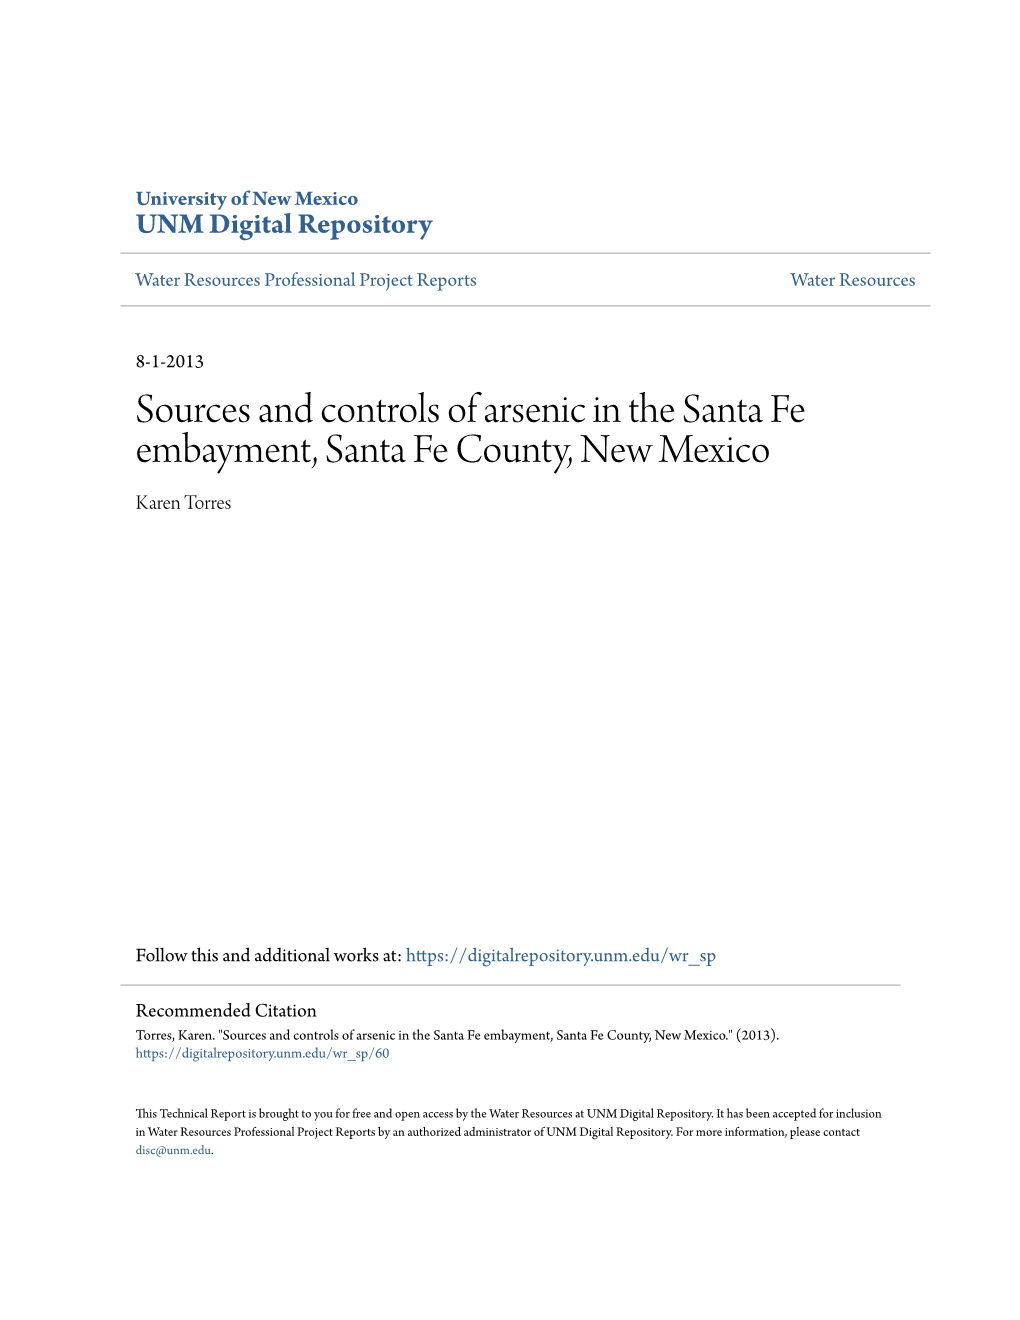 Sources and Controls of Arsenic in the Santa Fe Embayment, Santa Fe County, New Mexico Karen Torres